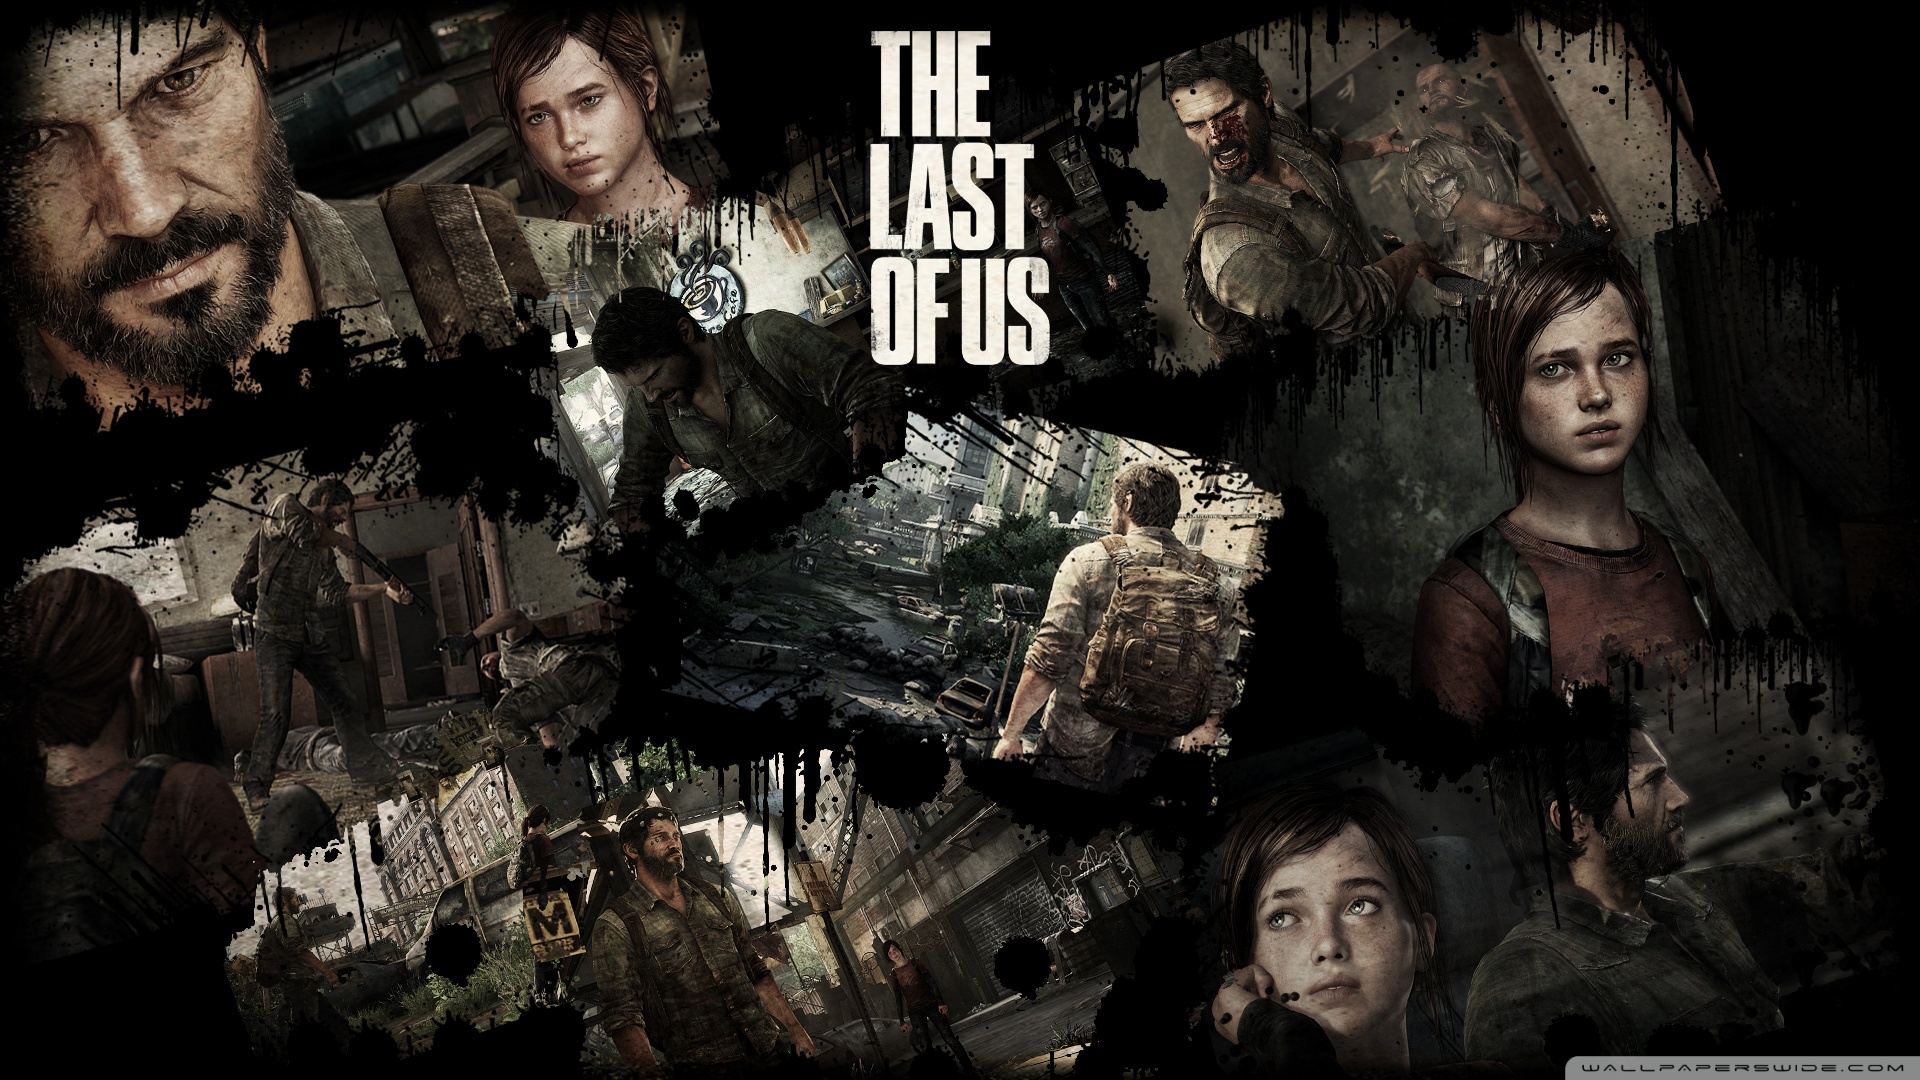 the-last-of-us-hd-wallpapers-games-images-the-last-of-us-wallpaper.jpg